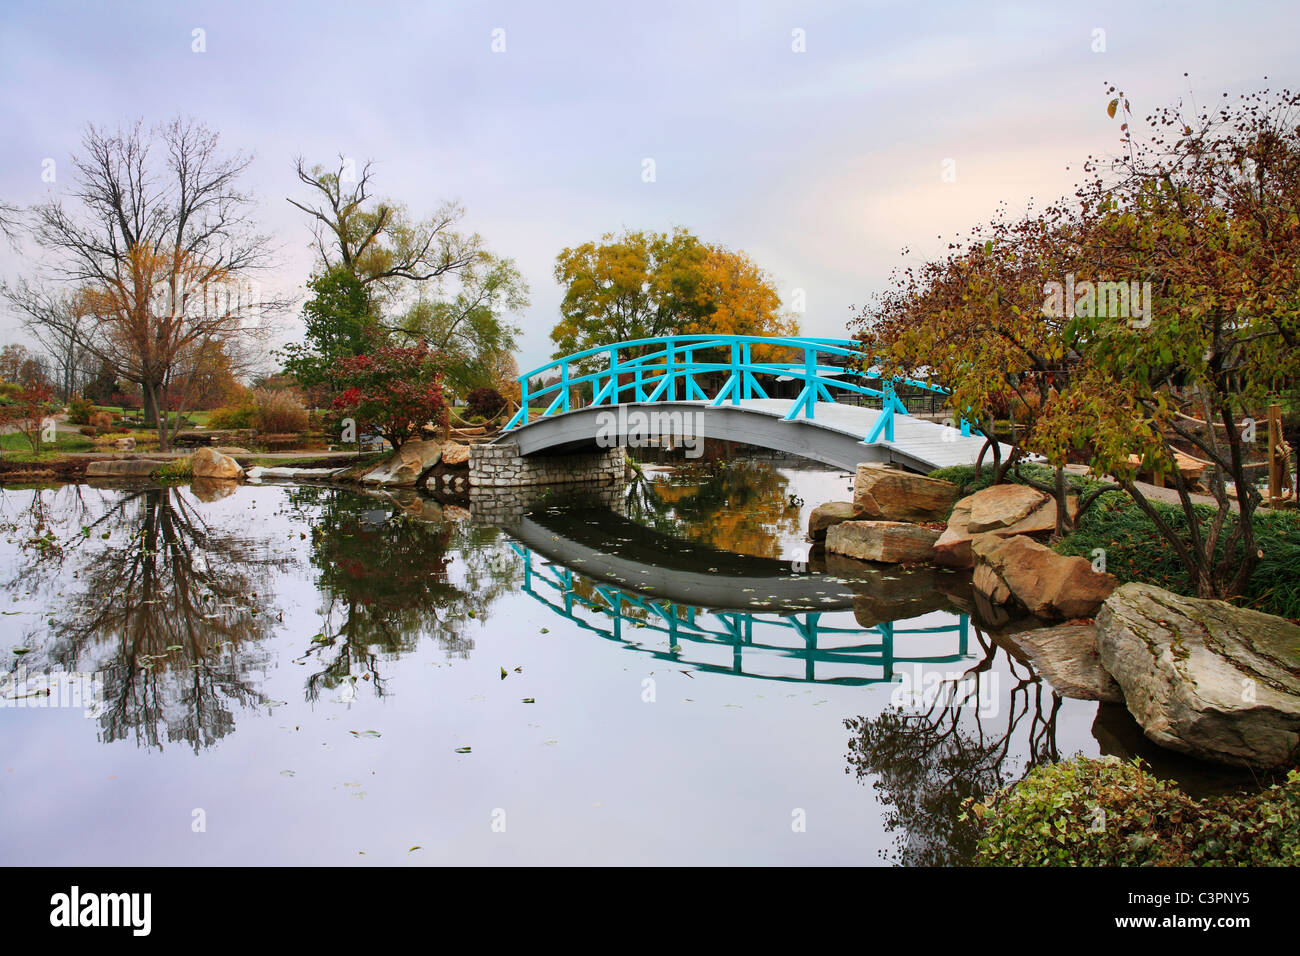 A Pastoral Scene Of A Japanese Foot Bridge Over A Quiet Little Pond On A Rainy Day In Autumn, Southwestern Ohio, USA Stock Photo